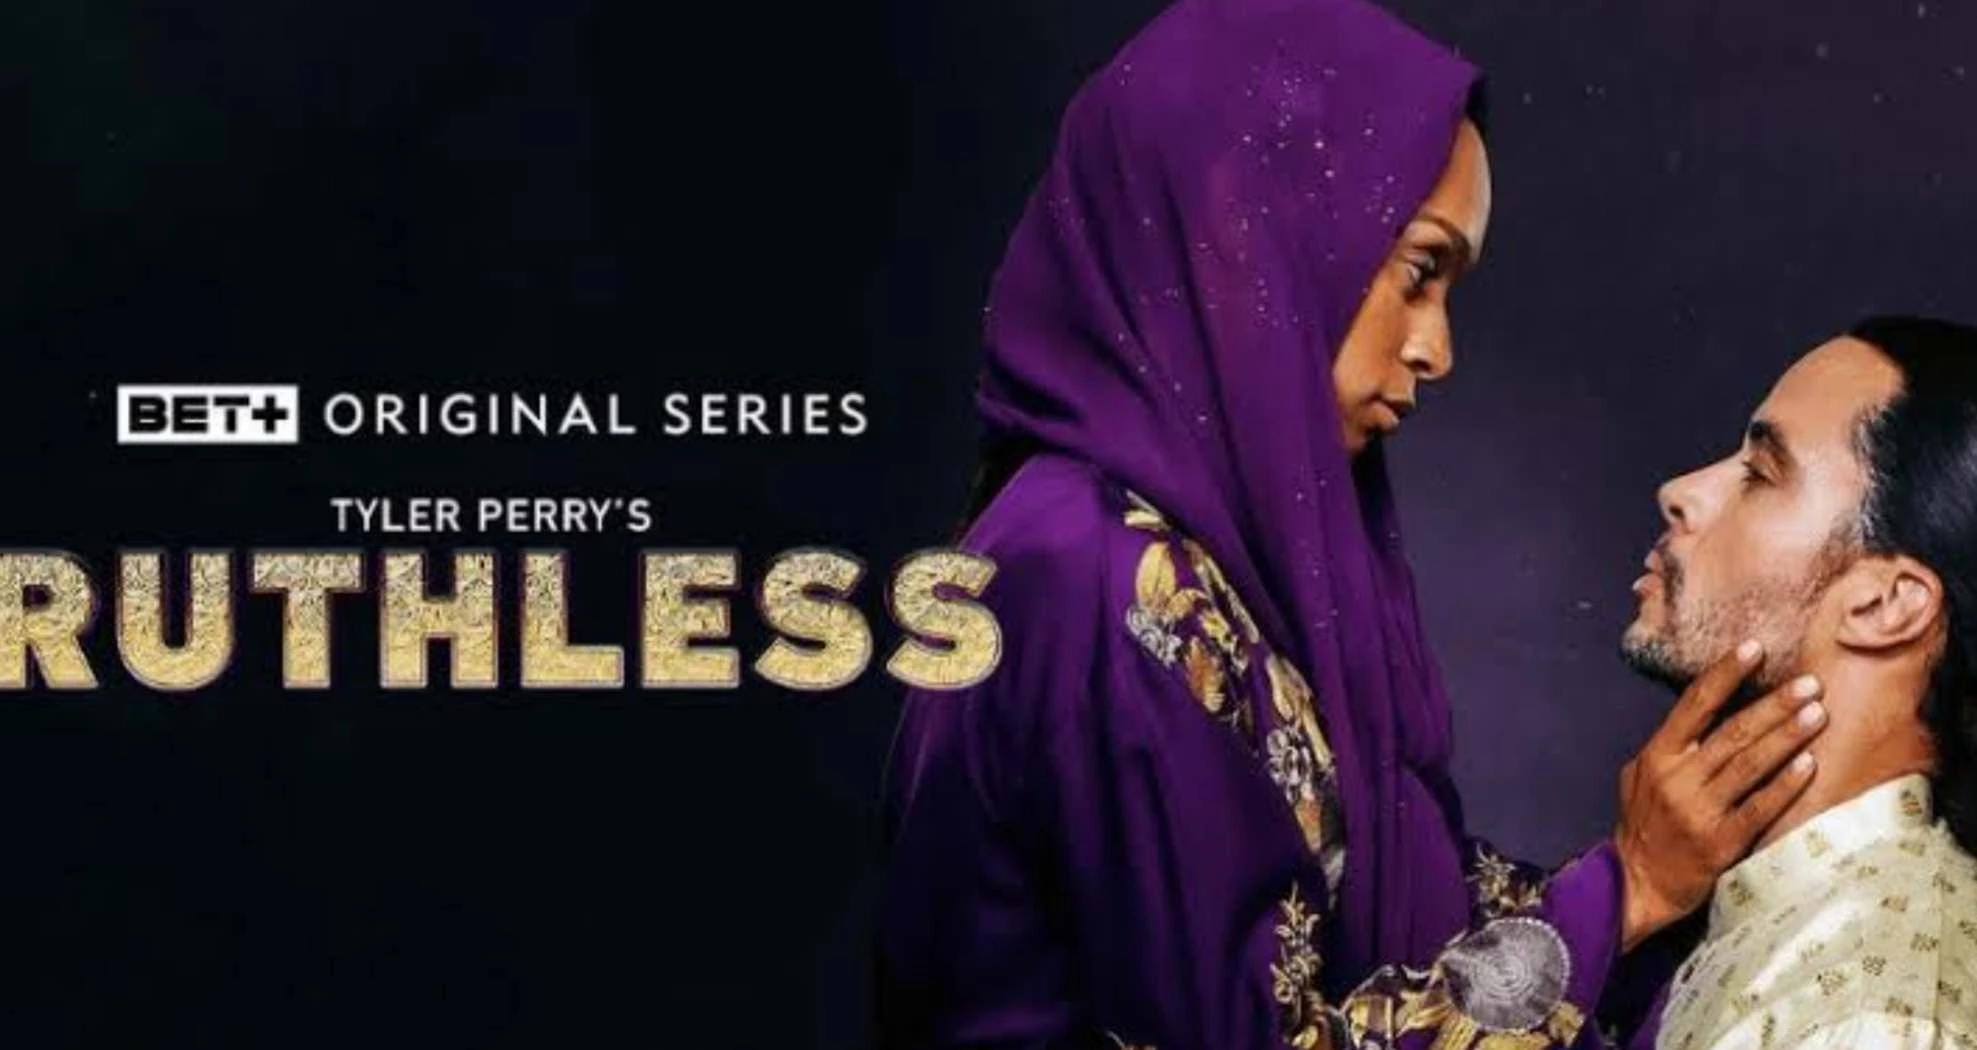 Where Can You Watch Tyler Perry's Ruthless Season 4 Episode 11?